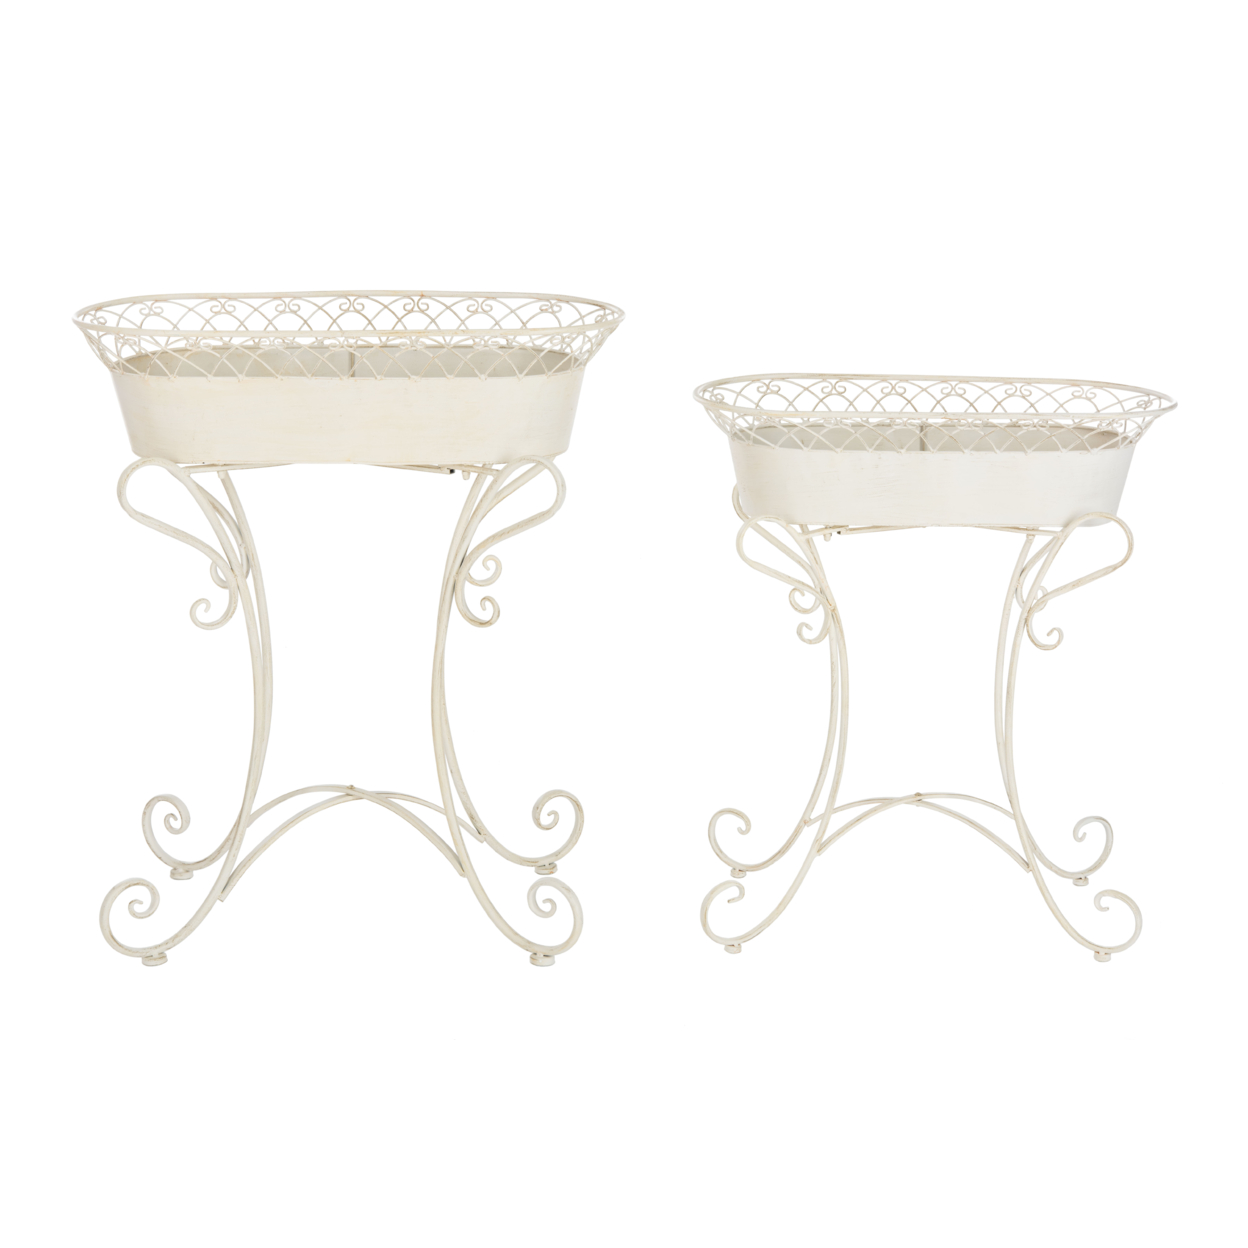 SAFAVIEH Outdoor Collection Hendrick Planters Pearl White